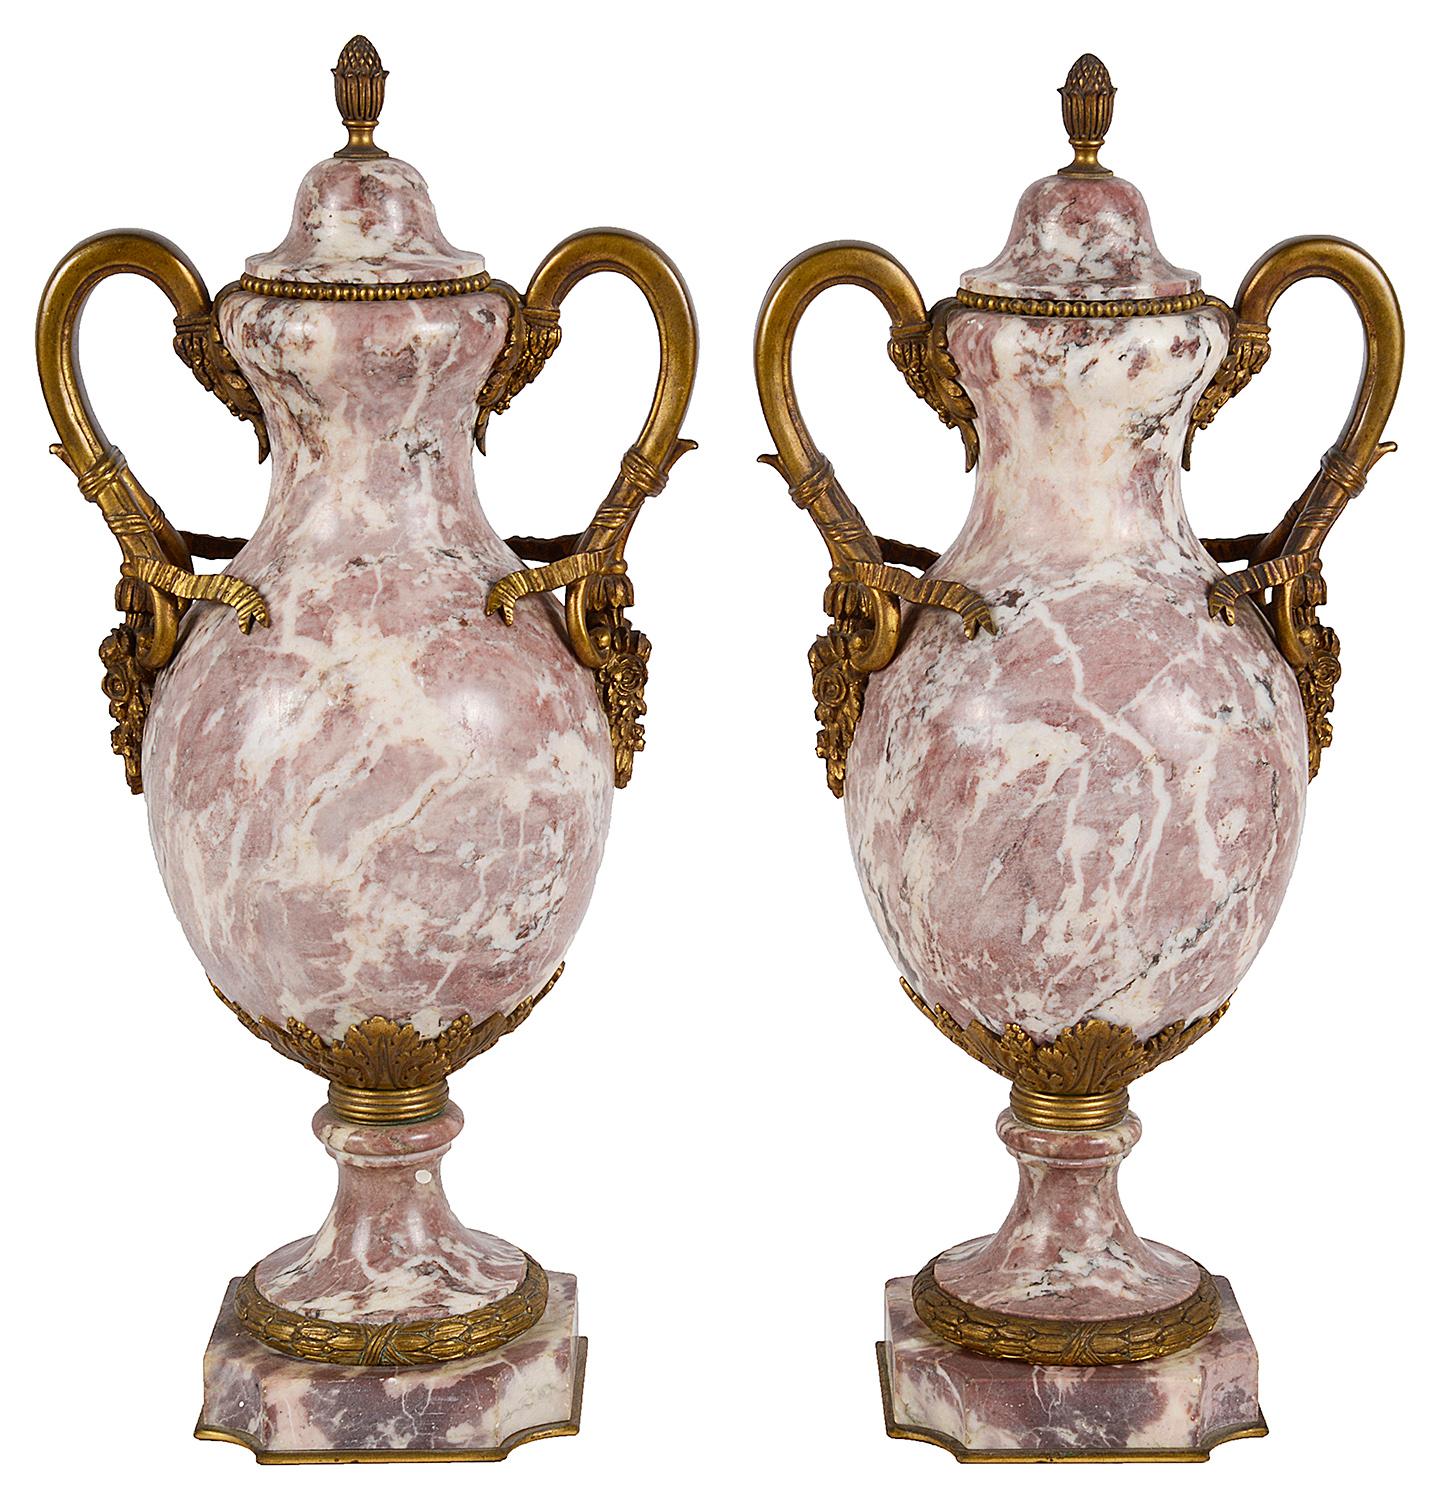 A good quality pair of 19th century French Breccia marble lidded urns, having wonderful figuring, gilded ormolu scrolling ribbon and floral decoration and raised on pedestal bases. Measures: 19